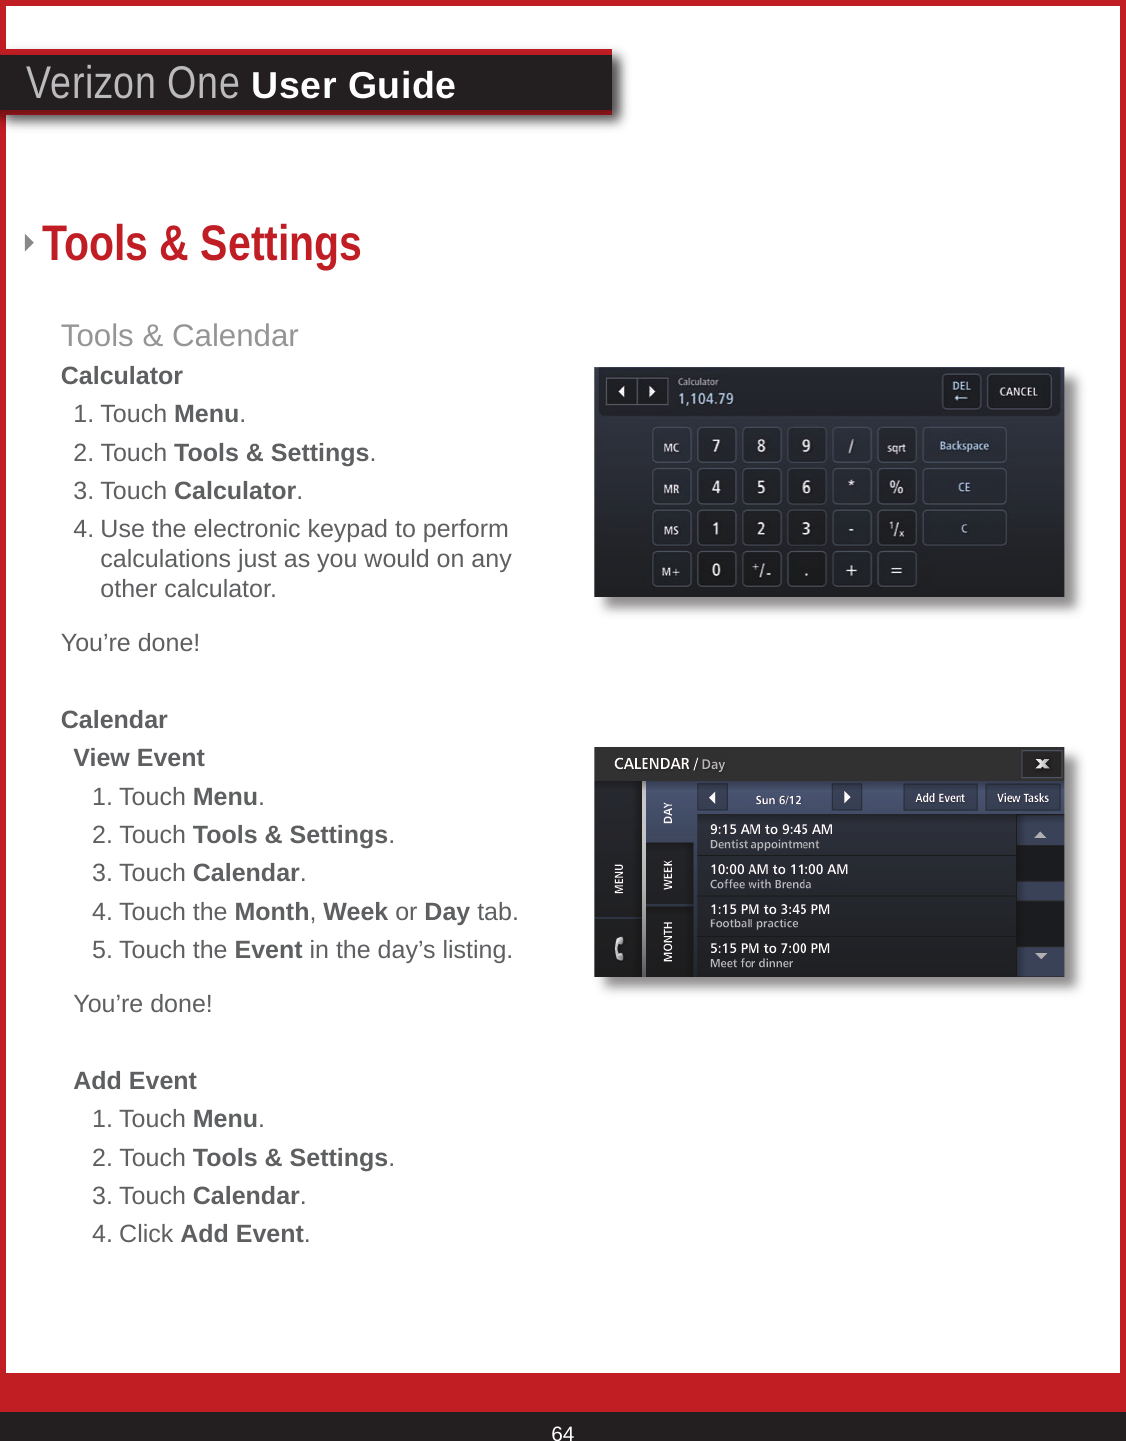 © 2007 Verizon. All Rights Reserved. 64Verizon One User GuideTools &amp; CalendarCalculator  1. Touch Menu.  2. Touch Tools &amp; Settings. 3. Touch Calculator.  4. Use the electronic keypad to perform      calculations just as you would on any      other calculator.You’re done!Calendar  View Event     1. Touch Menu.   2. Touch Tools &amp; Settings.   3. Touch Calendar.   4. Touch the Month, Week or Day tab.   5. Touch the Event in the day’s listing.  You’re done!  Add Event    1. Touch Menu.   2. Touch Tools &amp; Settings.   3. Touch Calendar.   4. Click Add Event.Tools &amp; Settings